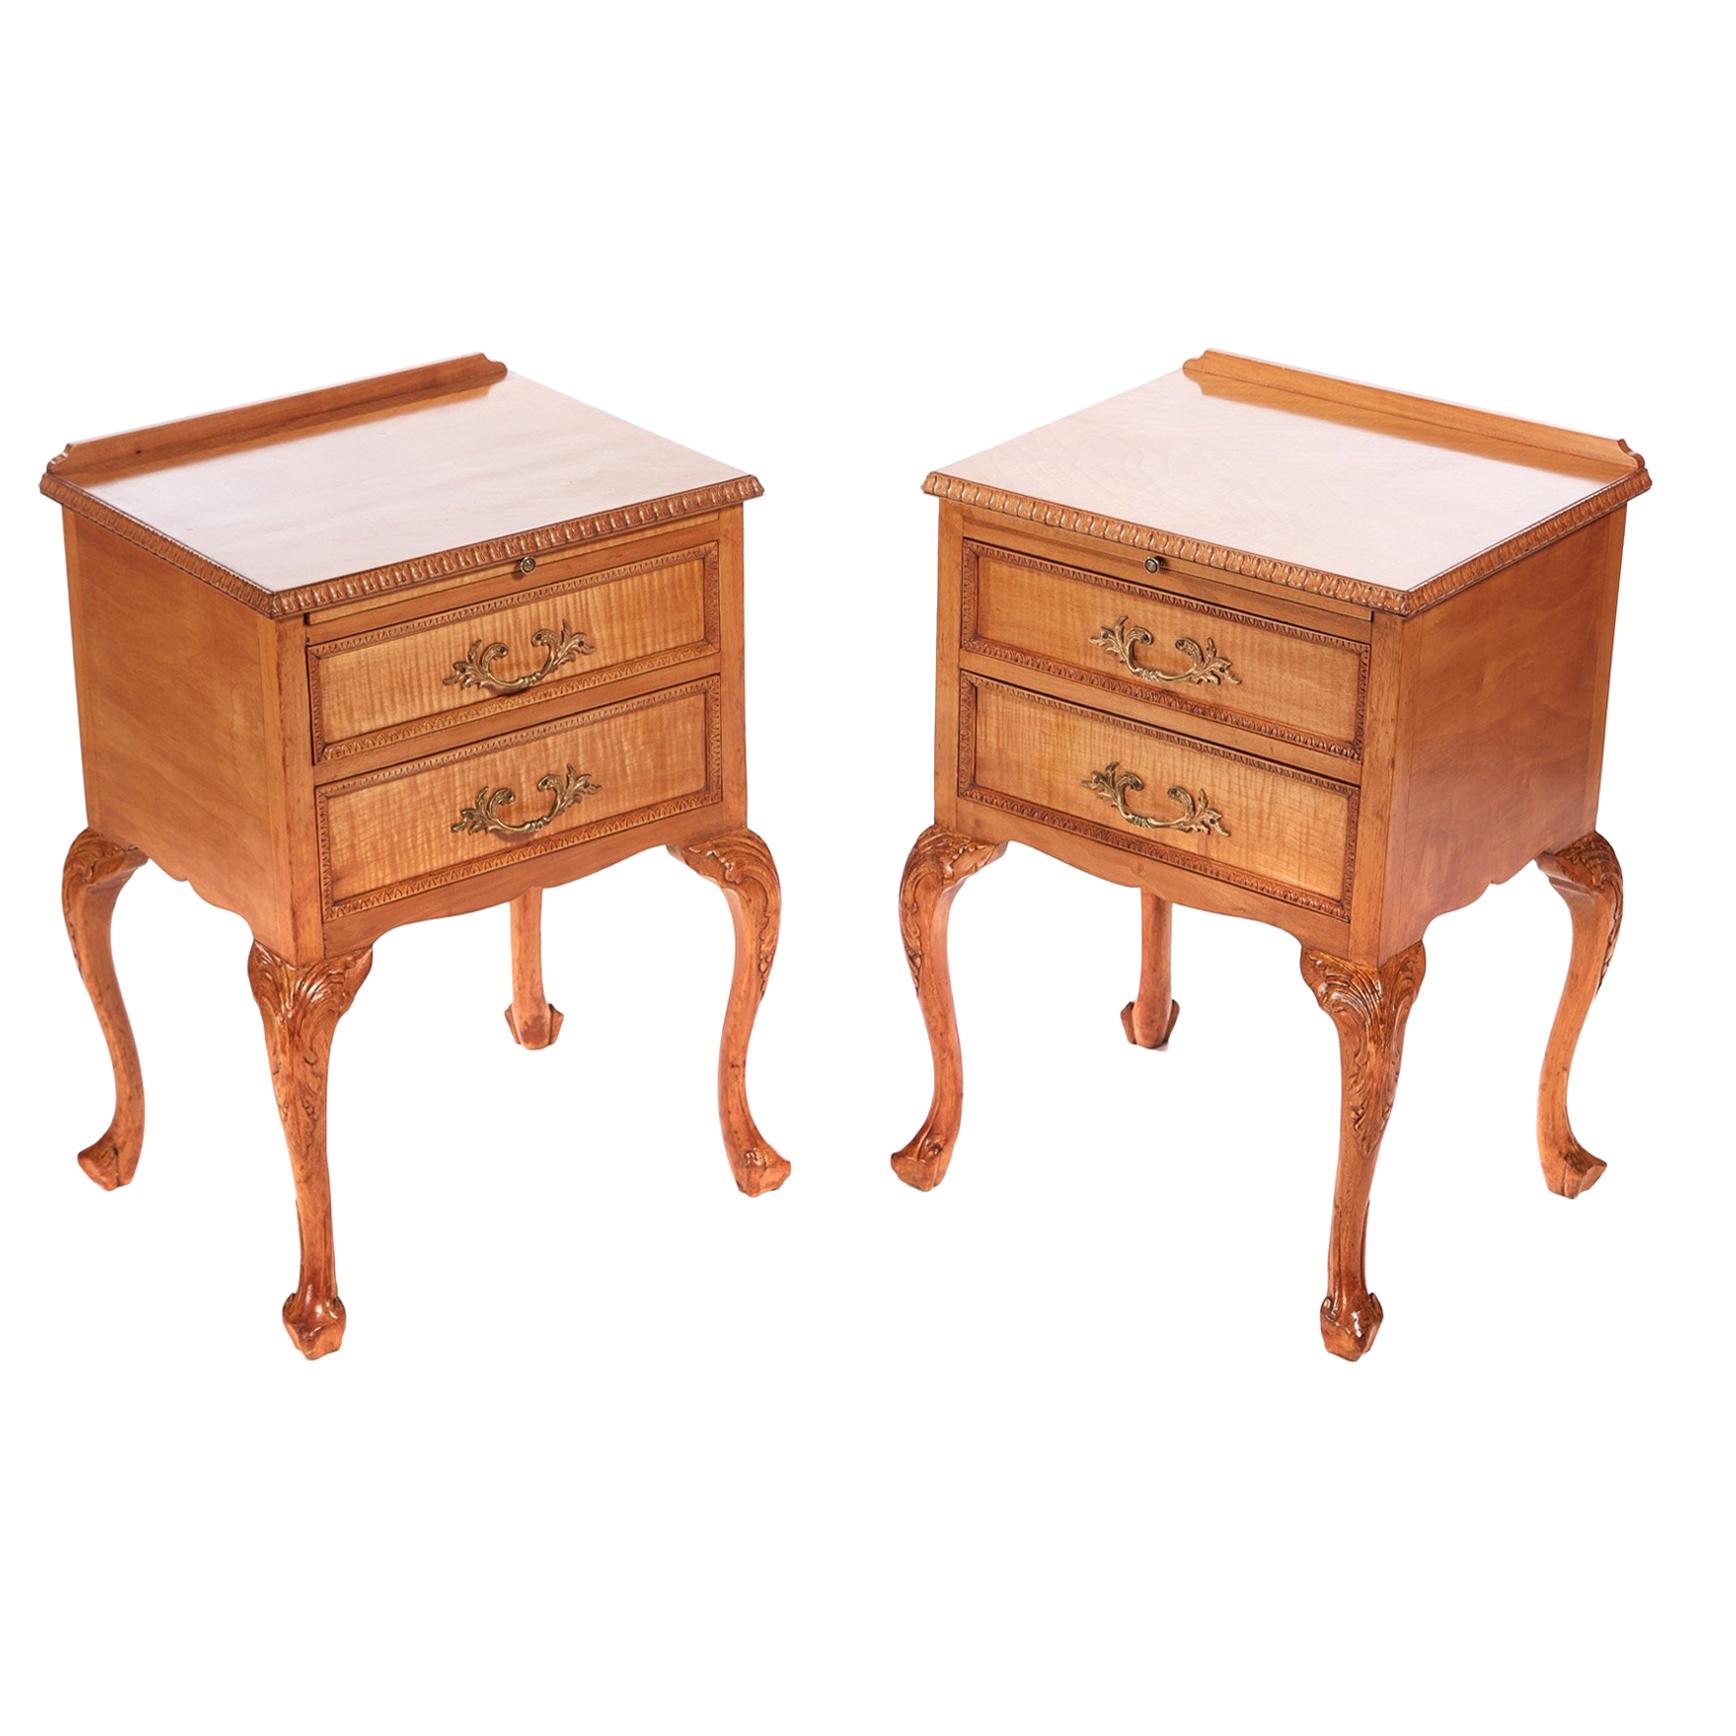 Quality Pair of Antique Maple Bedside Cabinets